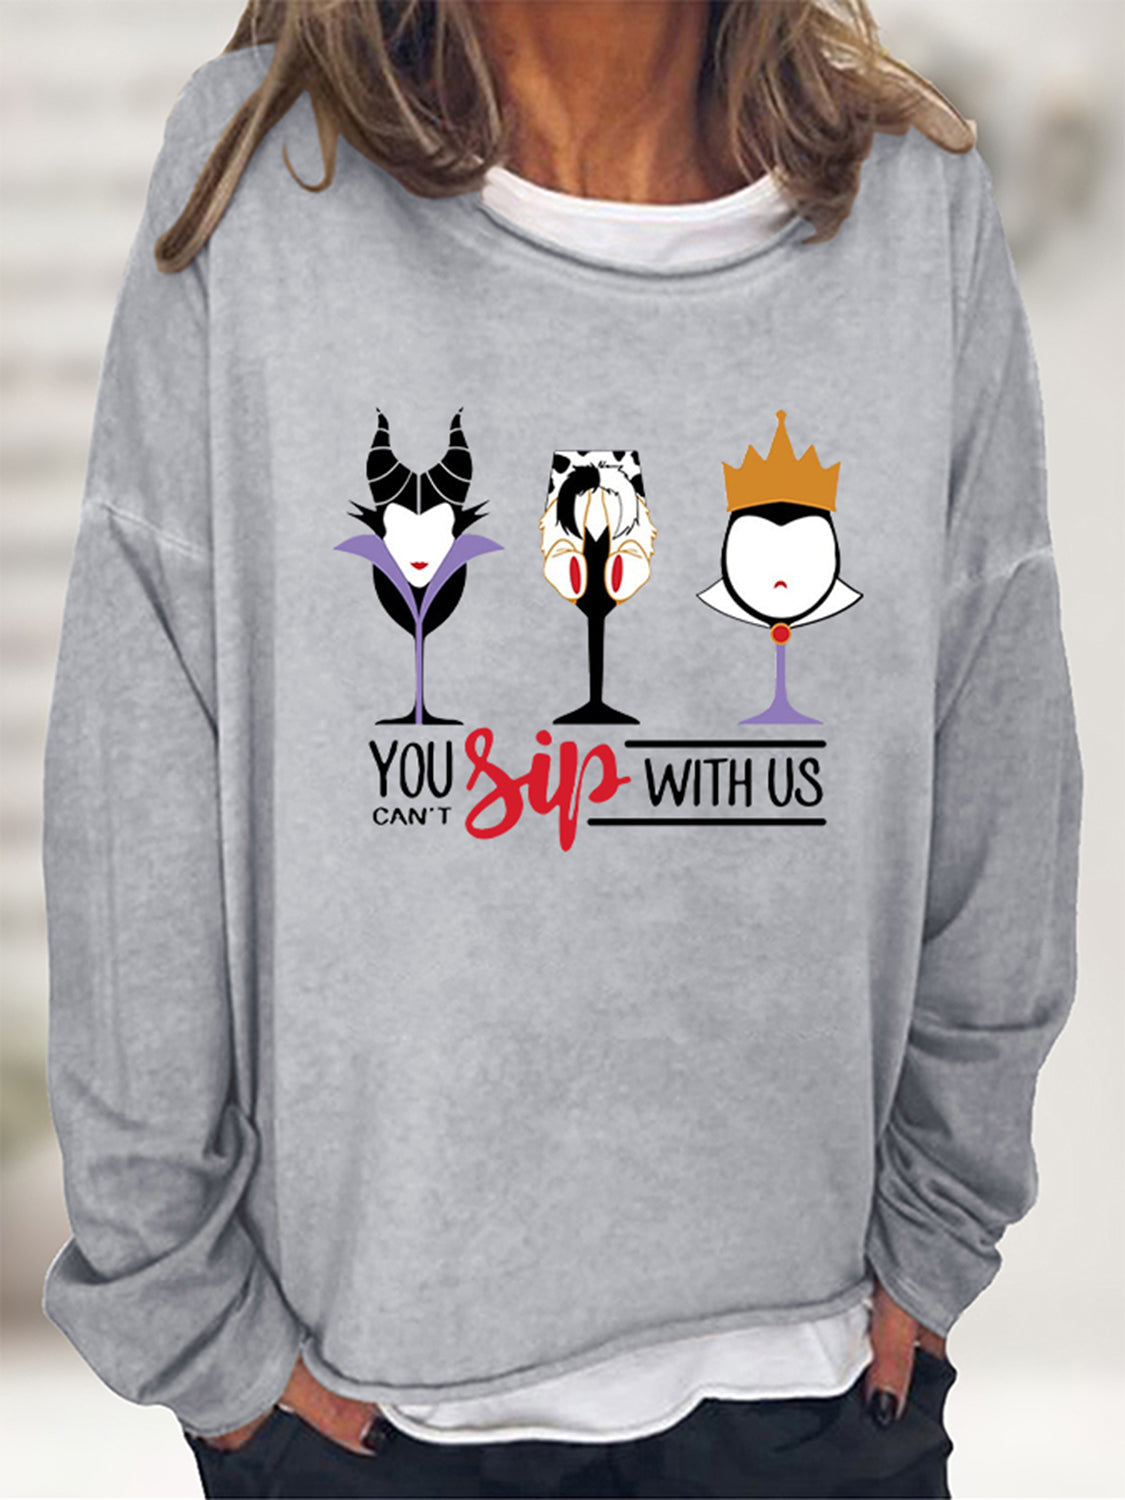 YOU CAN’T SIP WITH US Graphic Sweatshirt - Gray / S - T-Shirts - Shirts & Tops - 13 - 2024